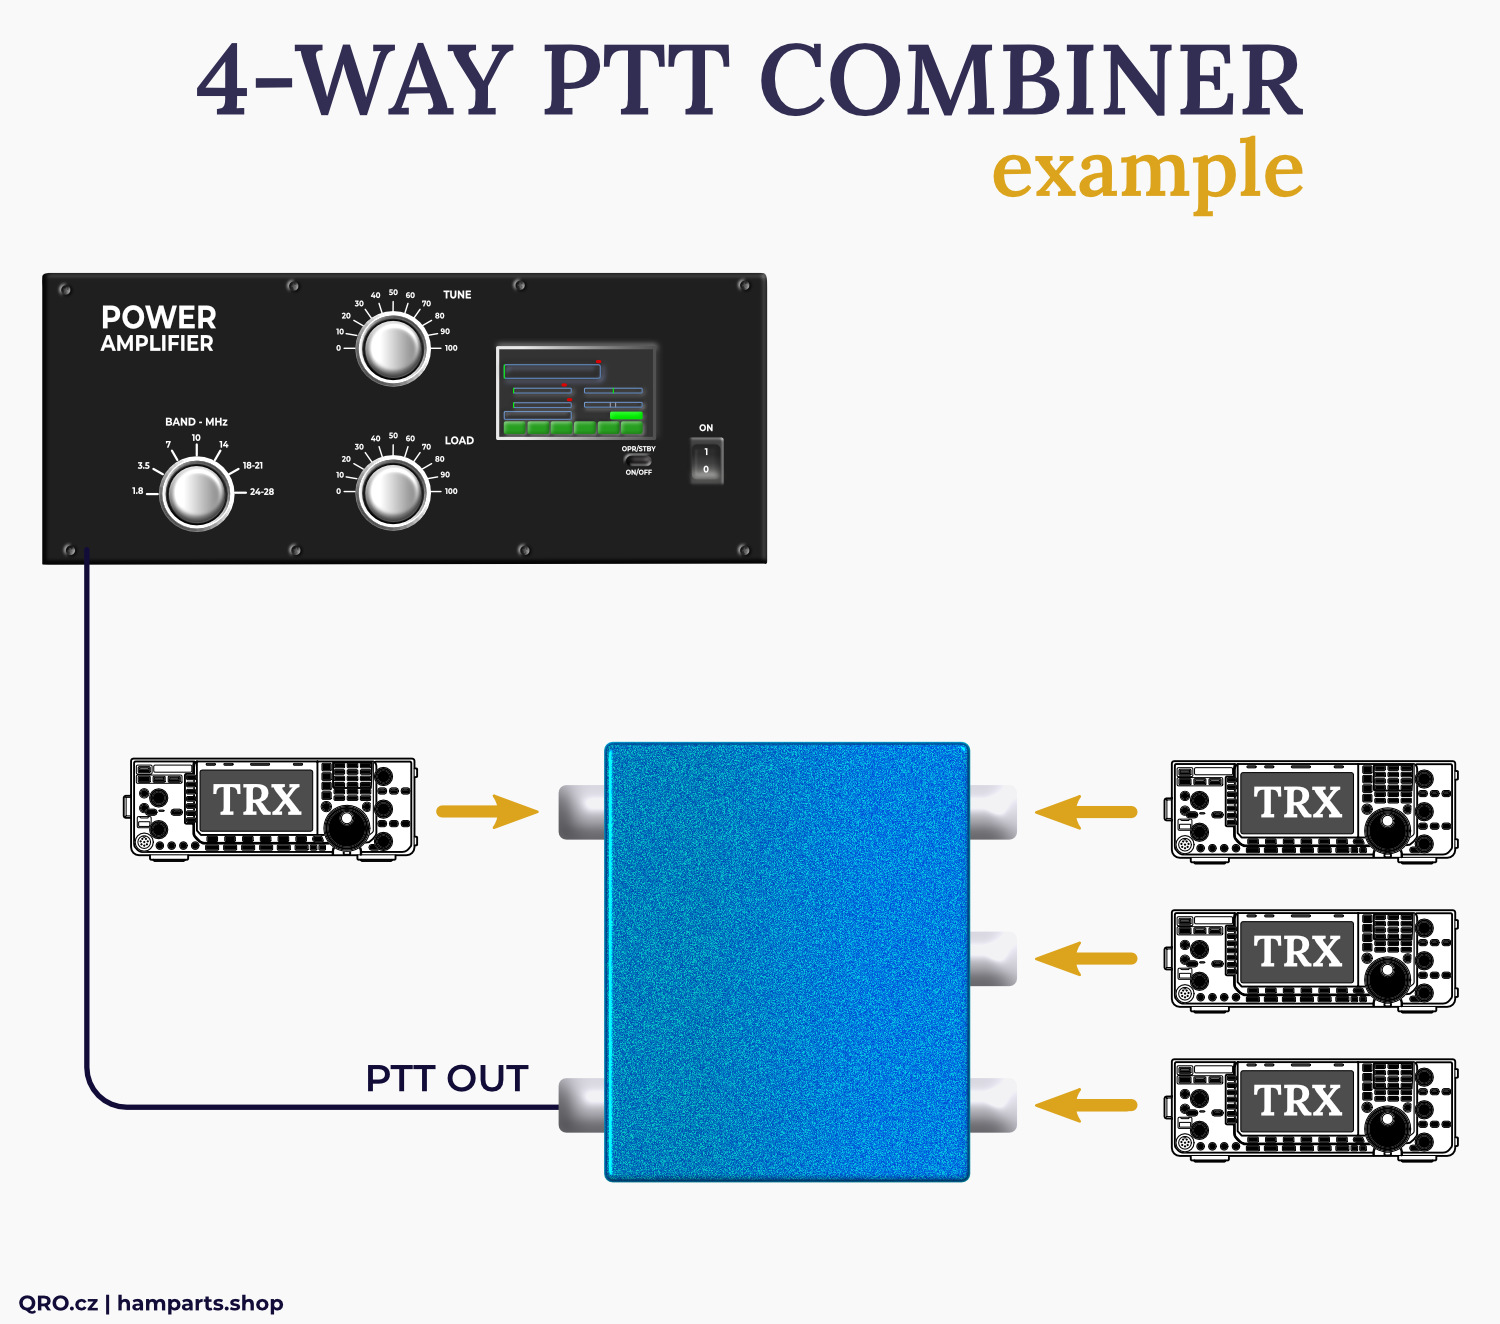 4-way ptt sequencer by qro.cz hamparts.shop